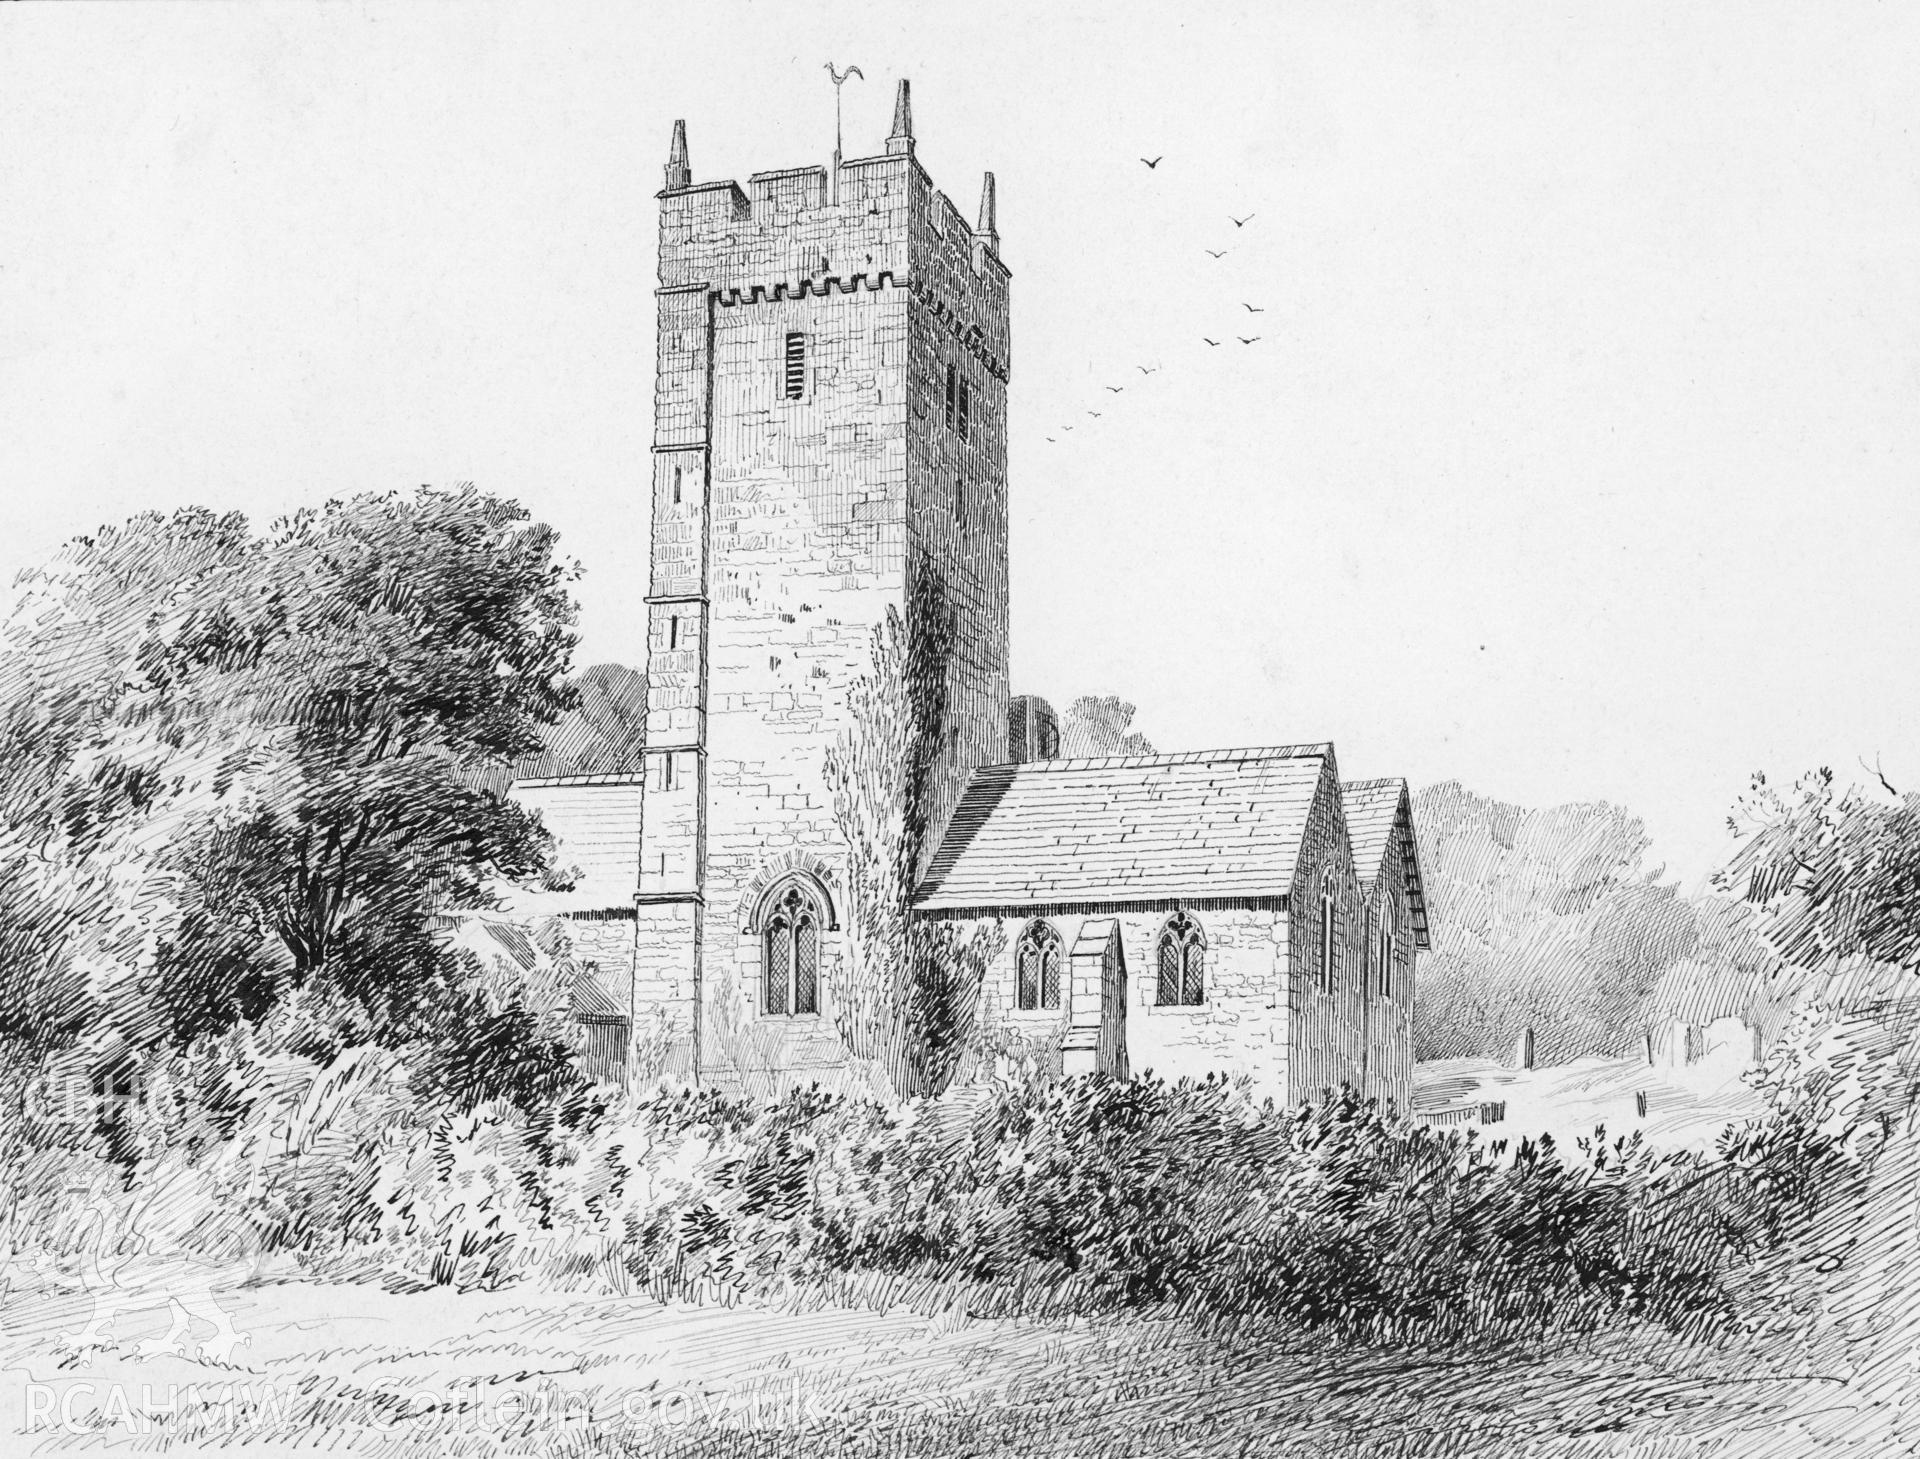 Digital copy of a pen and ink drawing showing Rhoscrowther Church produced by John Burt, 1885.